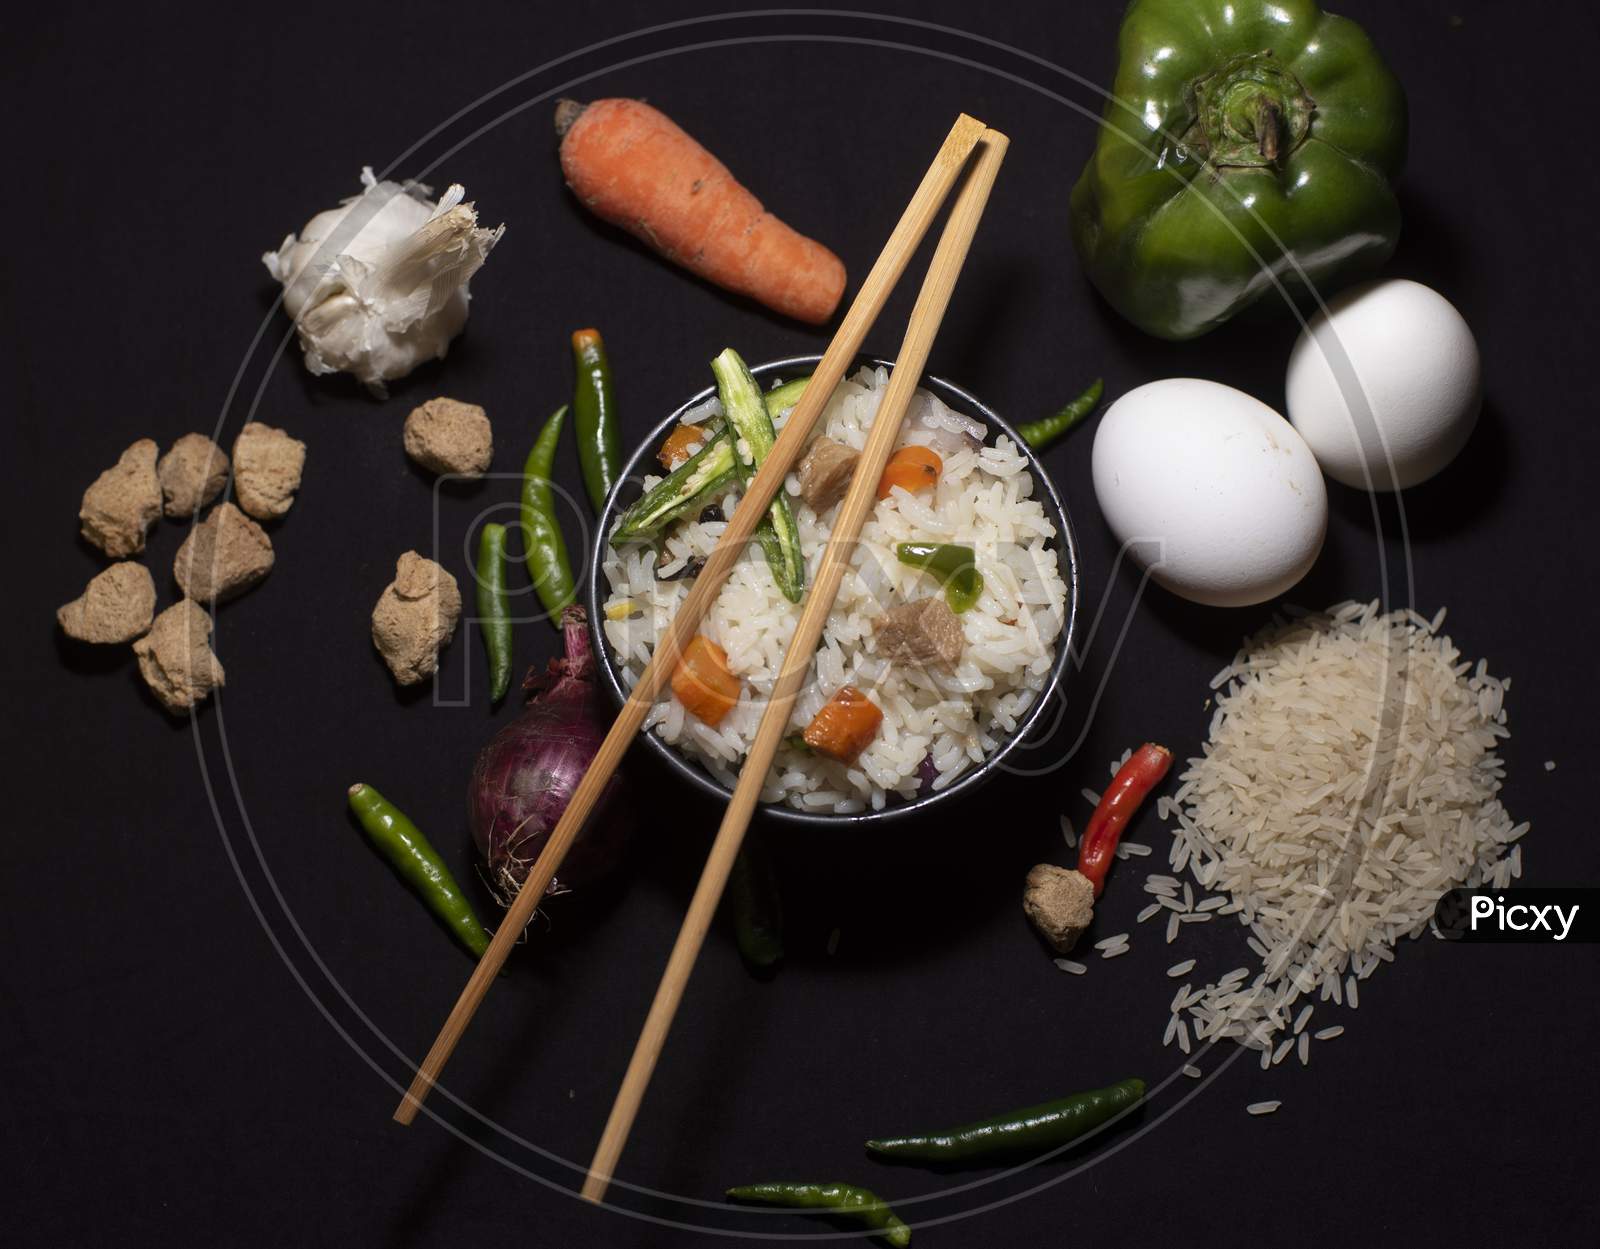 Top Down Image Of A Bowl Of A Steamed Rice And Vegetables Decorated With Veggies, Eggs, Grains, Chopsticks And Spoon In A Black Copy Space Background. Food Photography.